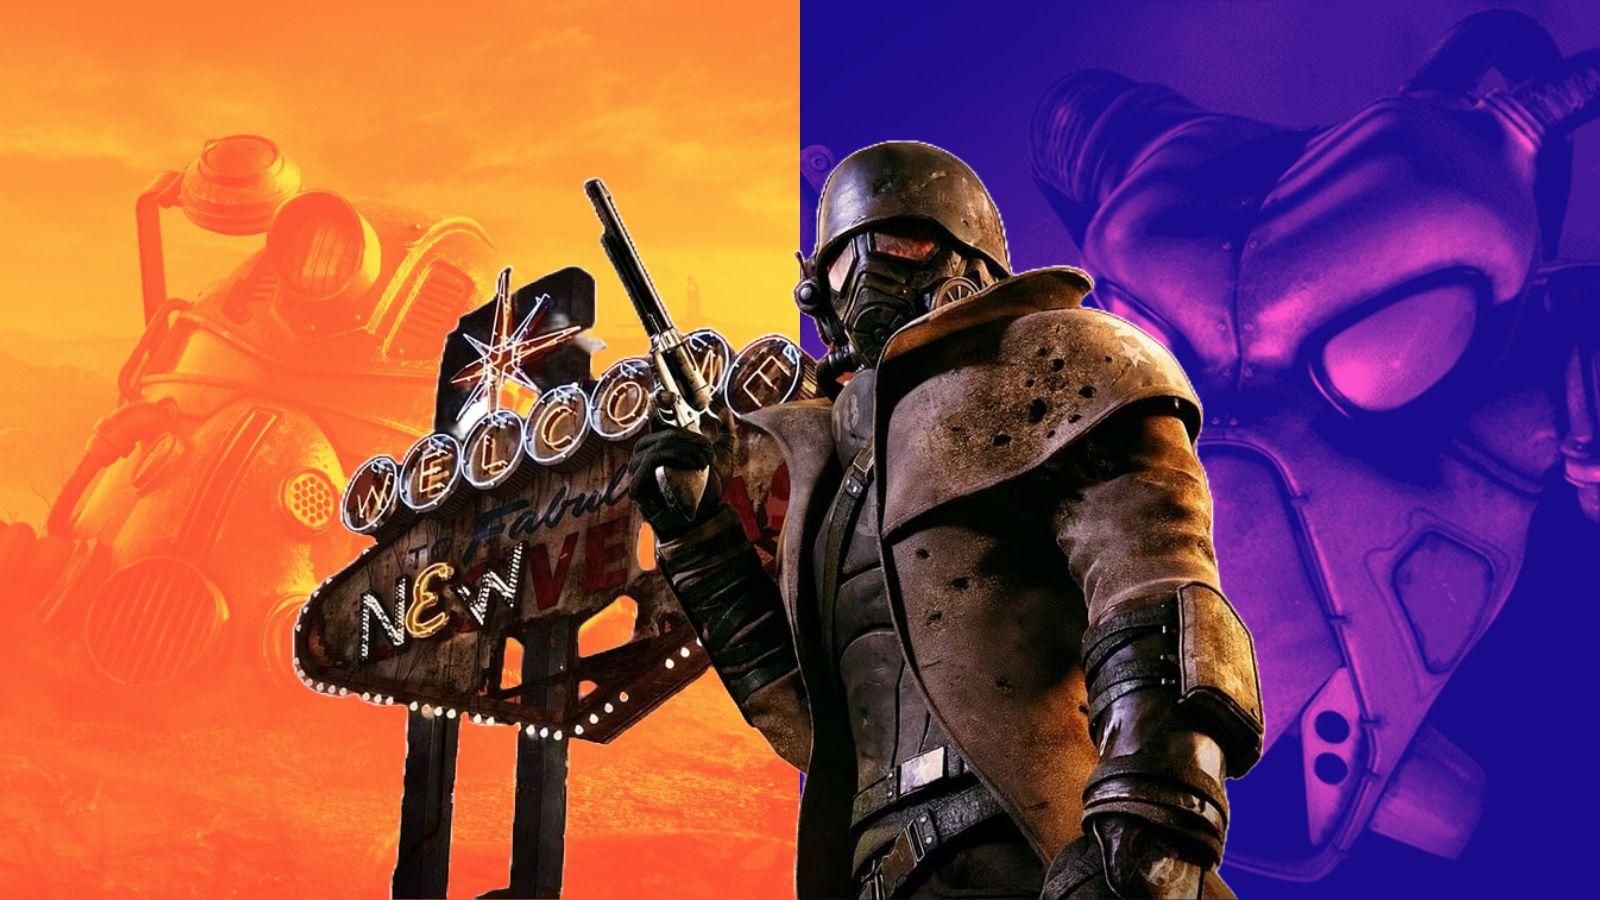 The New Vegas cover image on a background of images from Fallout 2 & 3